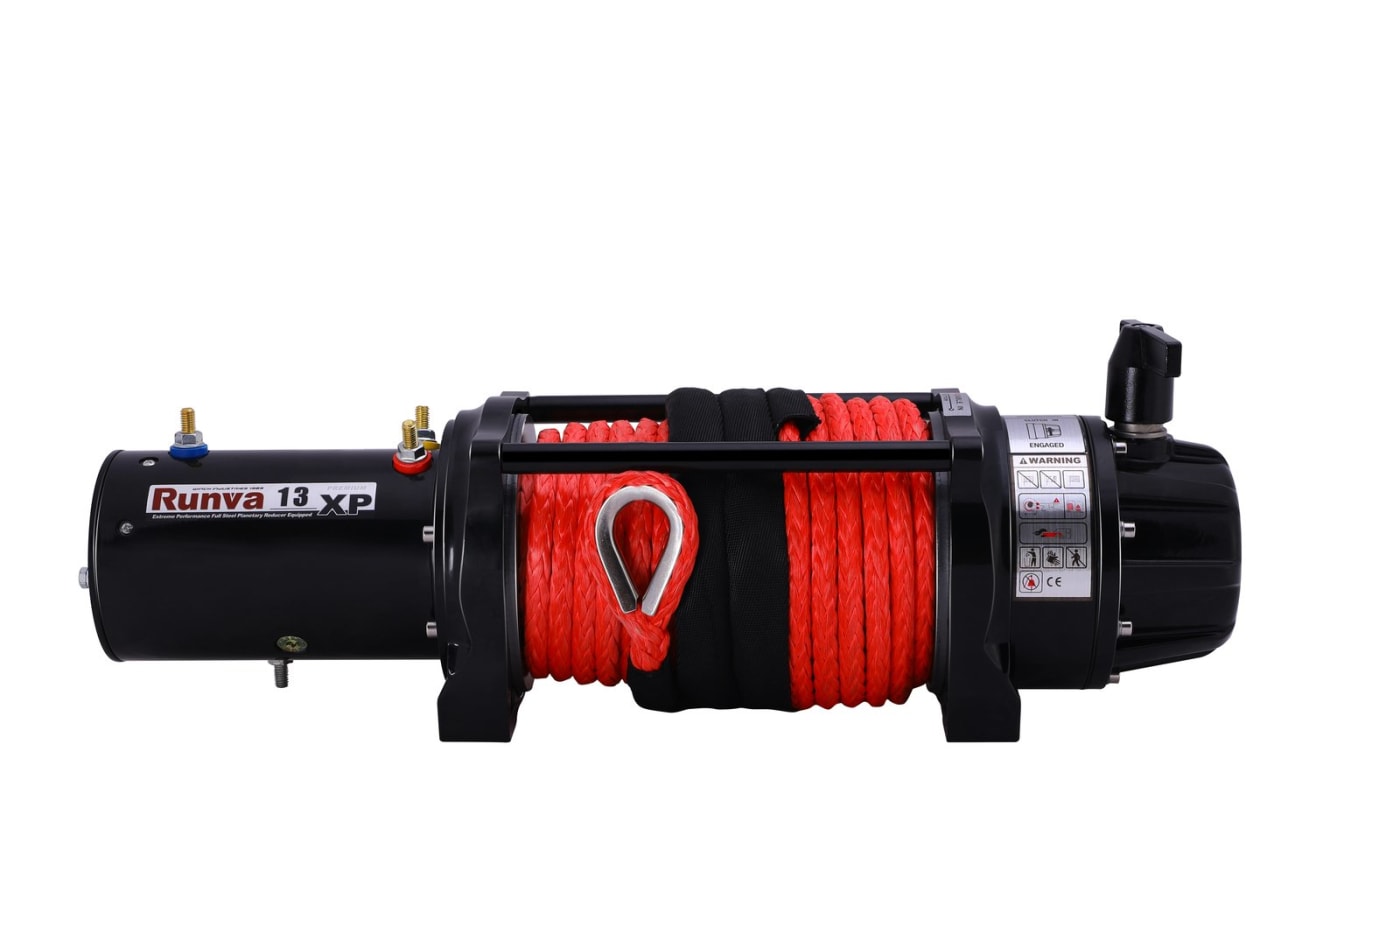 Runva 13XP Premium 12V/24V Winch with Synthetic Rope | Full IP67 Protection - Electric Winch